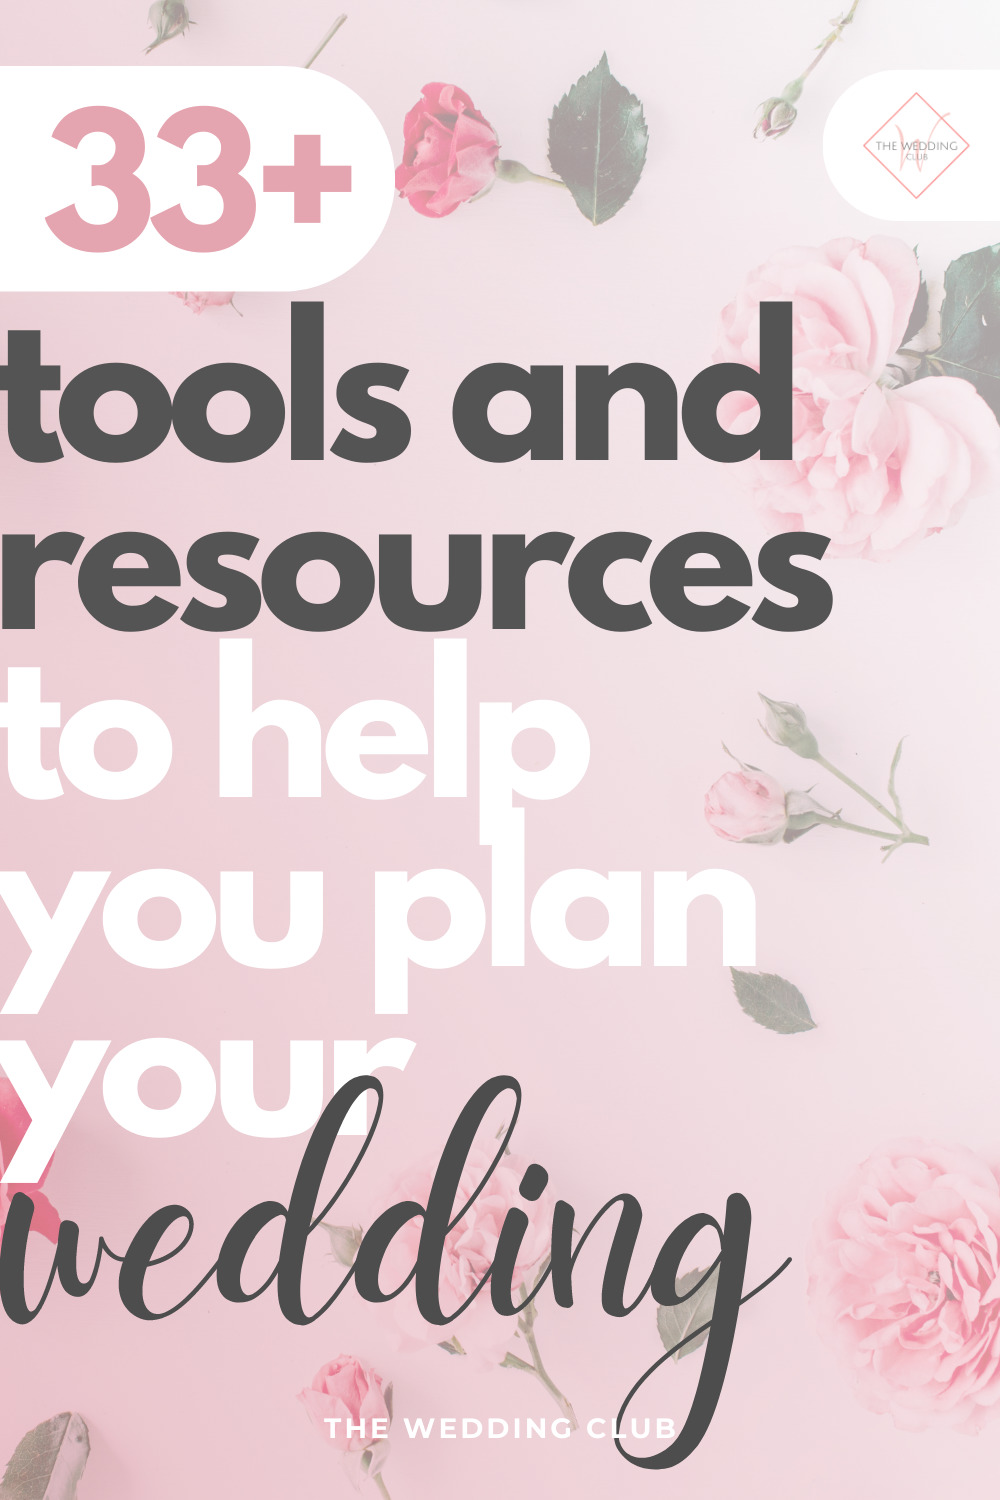 33+ Tools and resources to help you plan your wedding